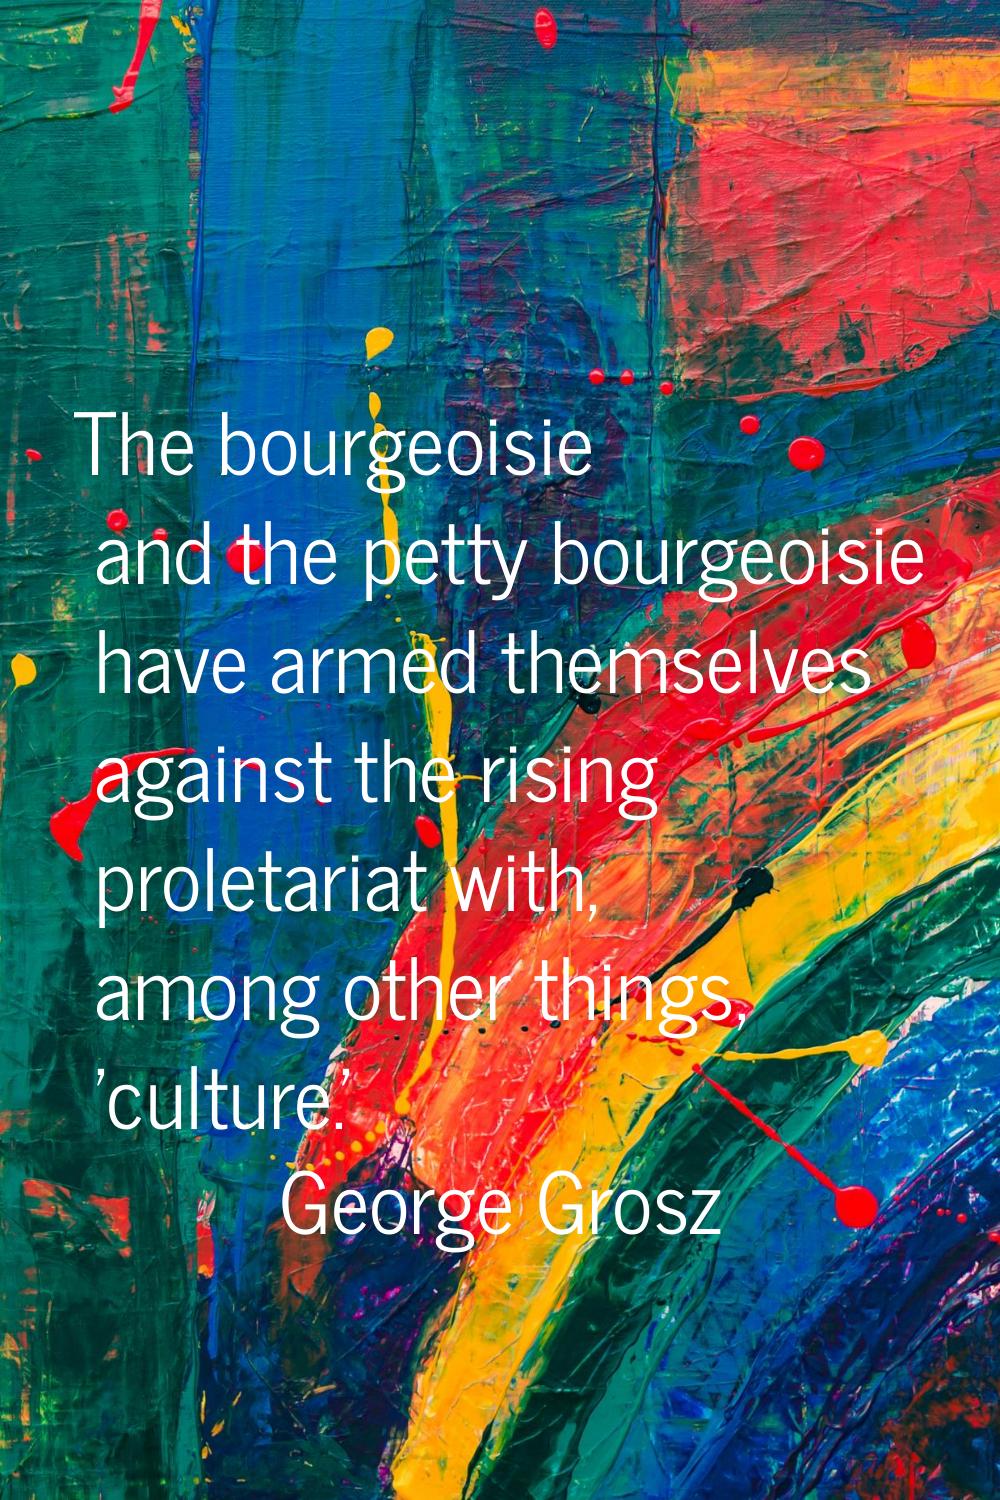 The bourgeoisie and the petty bourgeoisie have armed themselves against the rising proletariat with